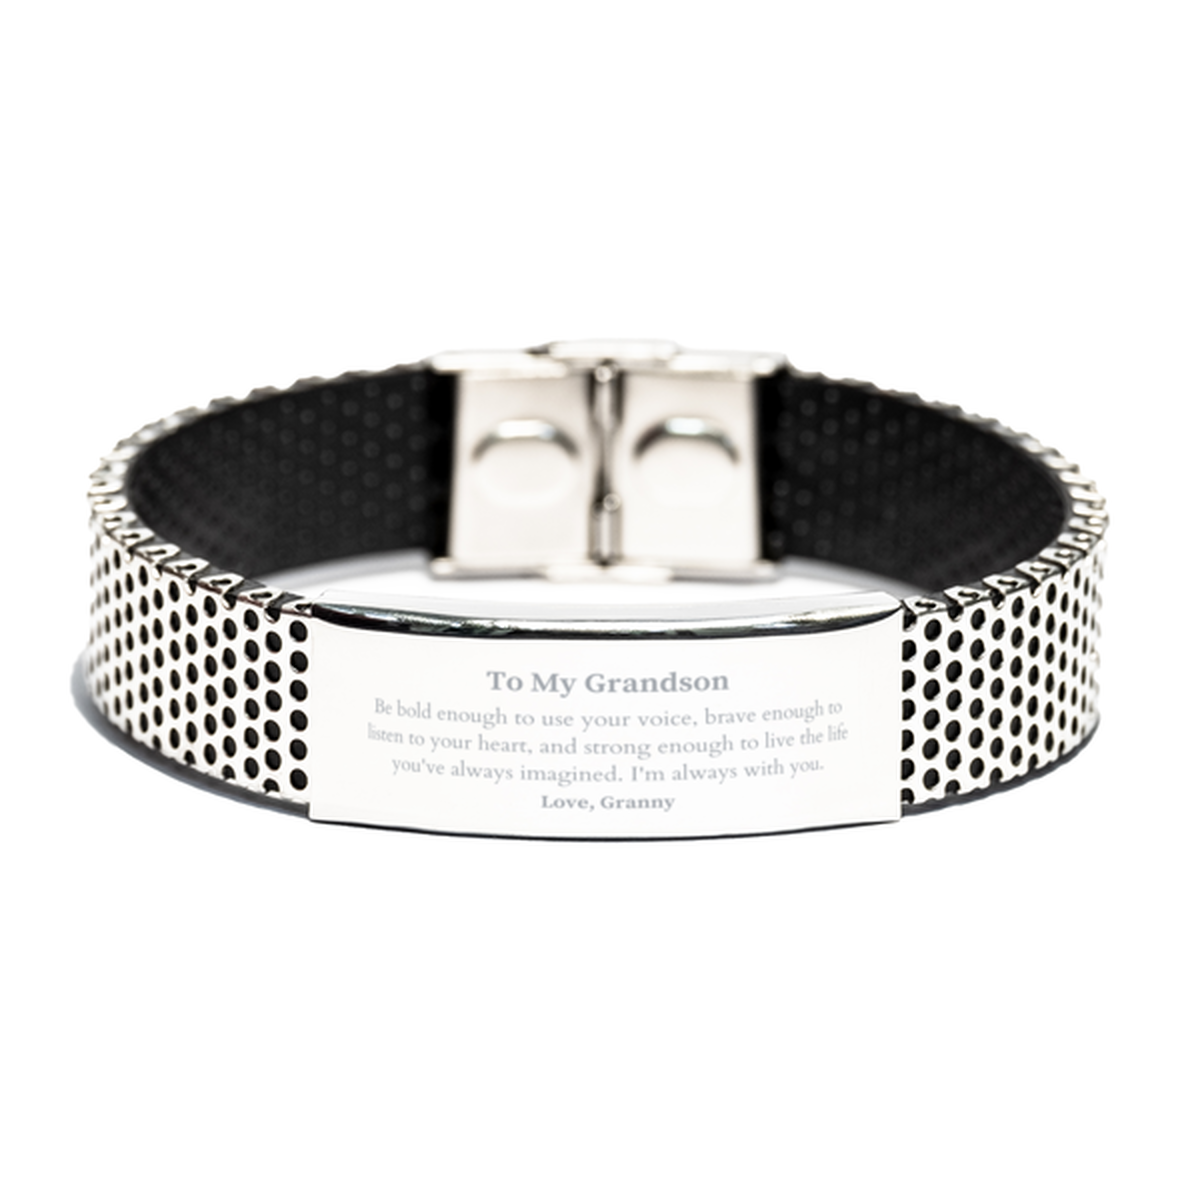 Keepsake Grandson Stainless Steel Bracelet Gift Idea Graduation Christmas Birthday Grandson from Granny, Grandson Be bold enough to use your voice, brave enough to listen to your heart. Love, Granny